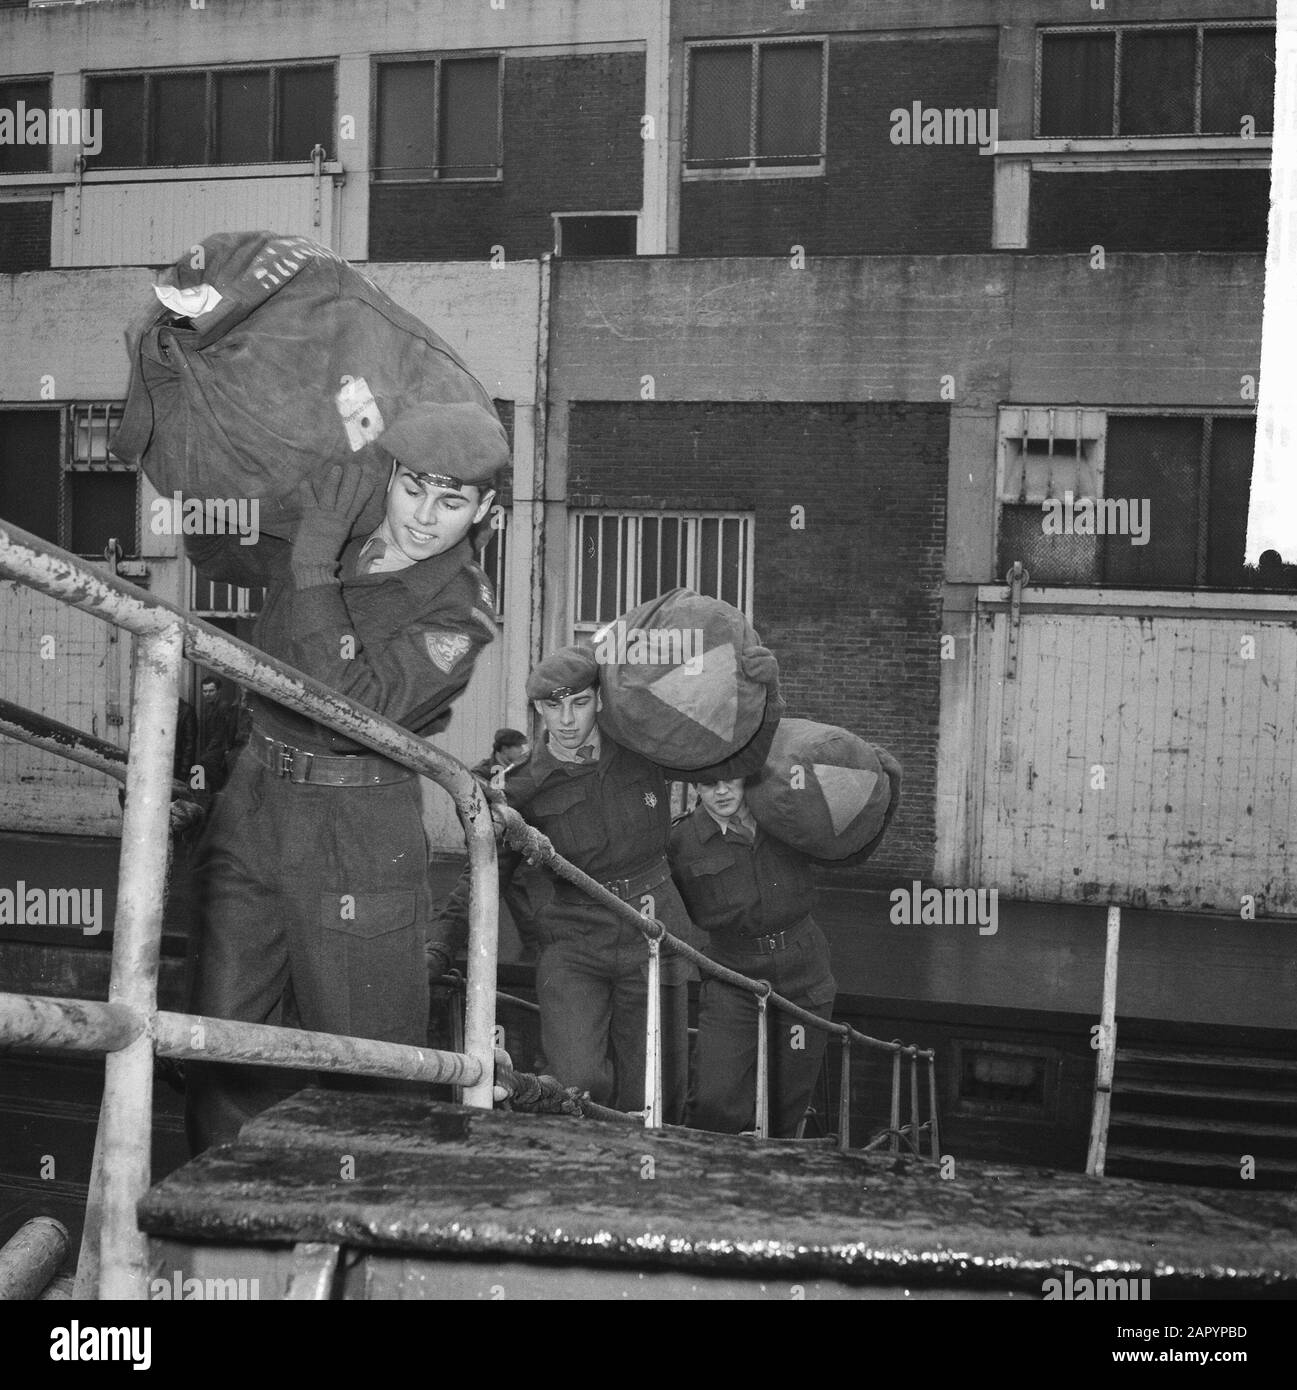 Departure first detachment of the first Surinamese company per Ms. Willemstad to Suriname, soldiers go on board with their duffel bag Date: January 13, 1961 Location: Suriname Keywords: COMPAGNIES, DETACHEMENTS, Soldiers, depart Institution name: MS Willemstad Stock Photo